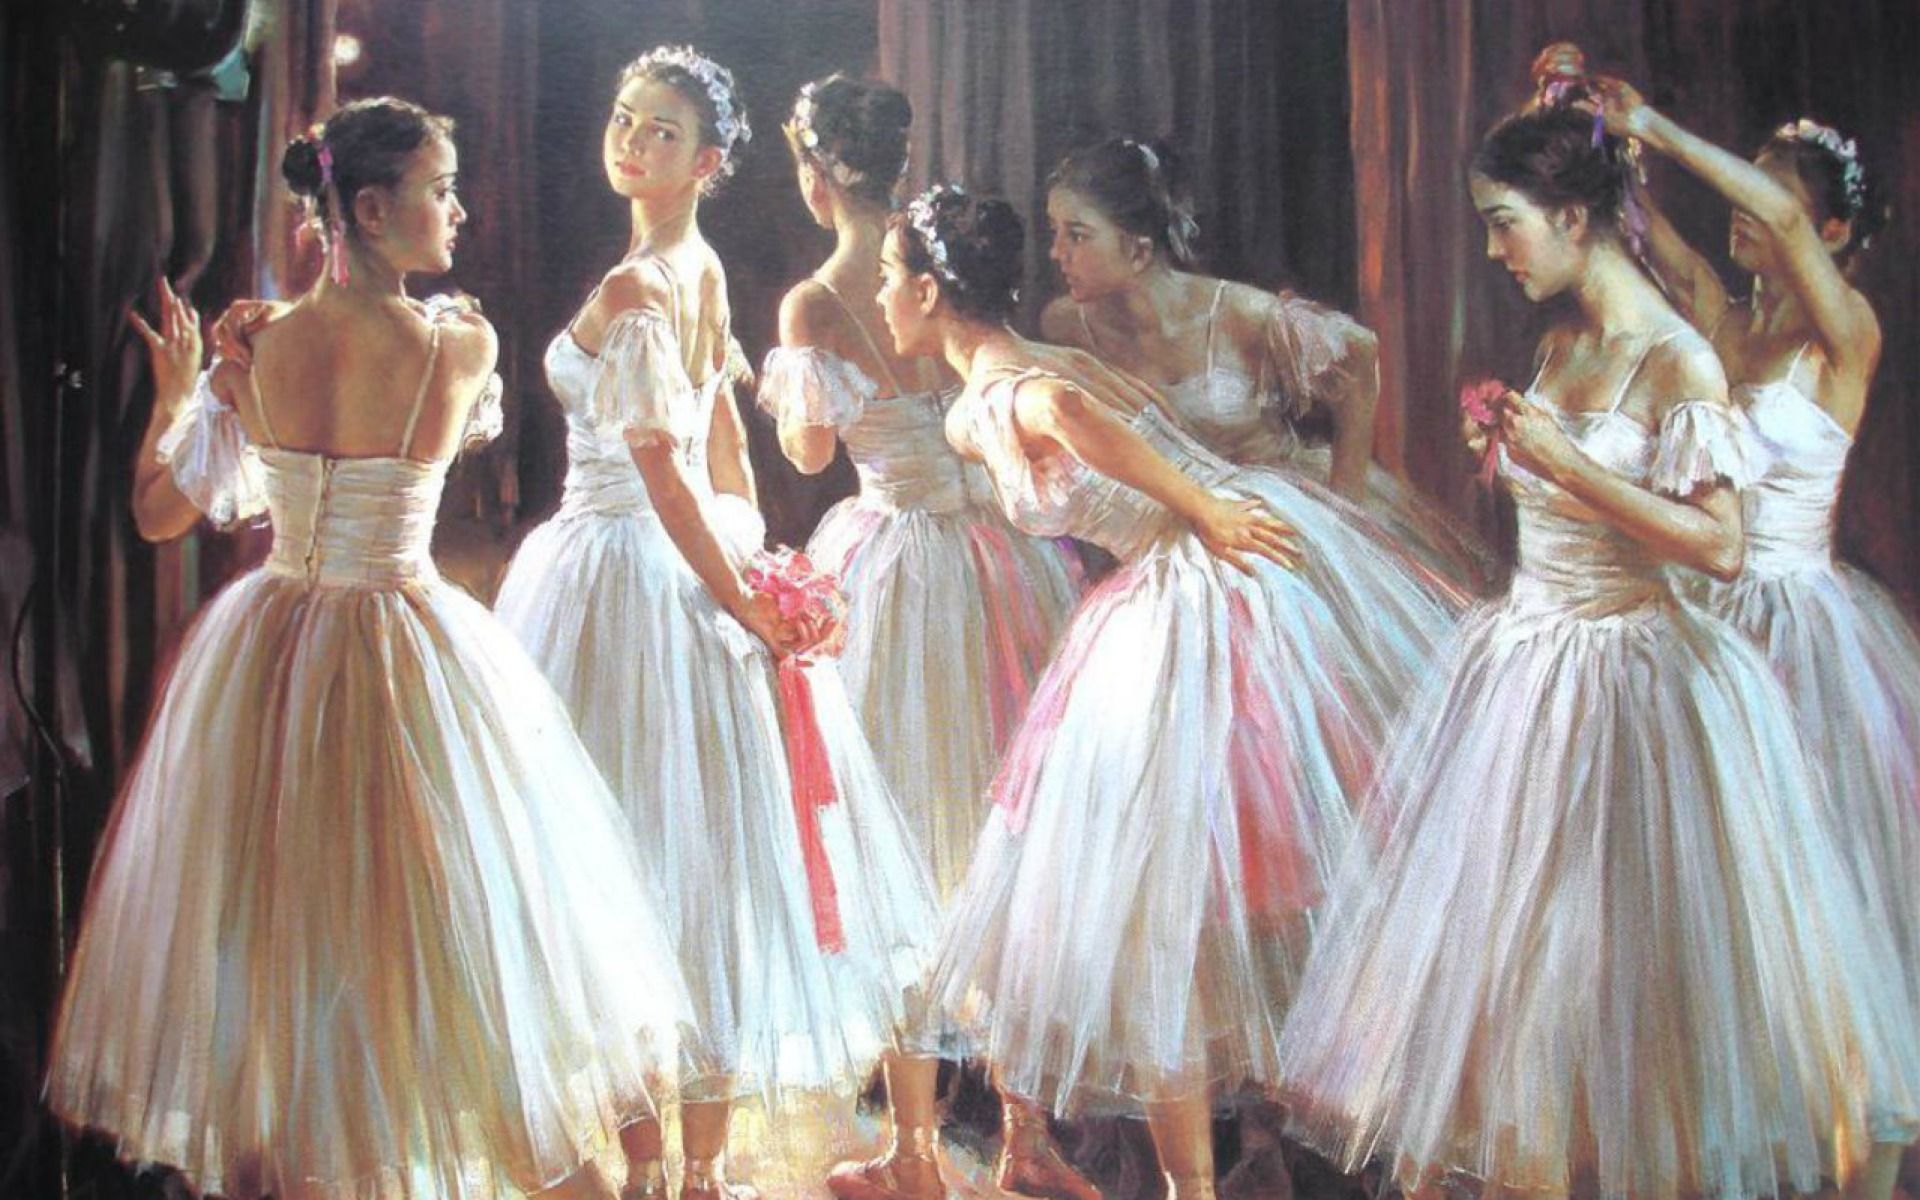 A painting of several ballerinas in white dresses - Dance, ballet